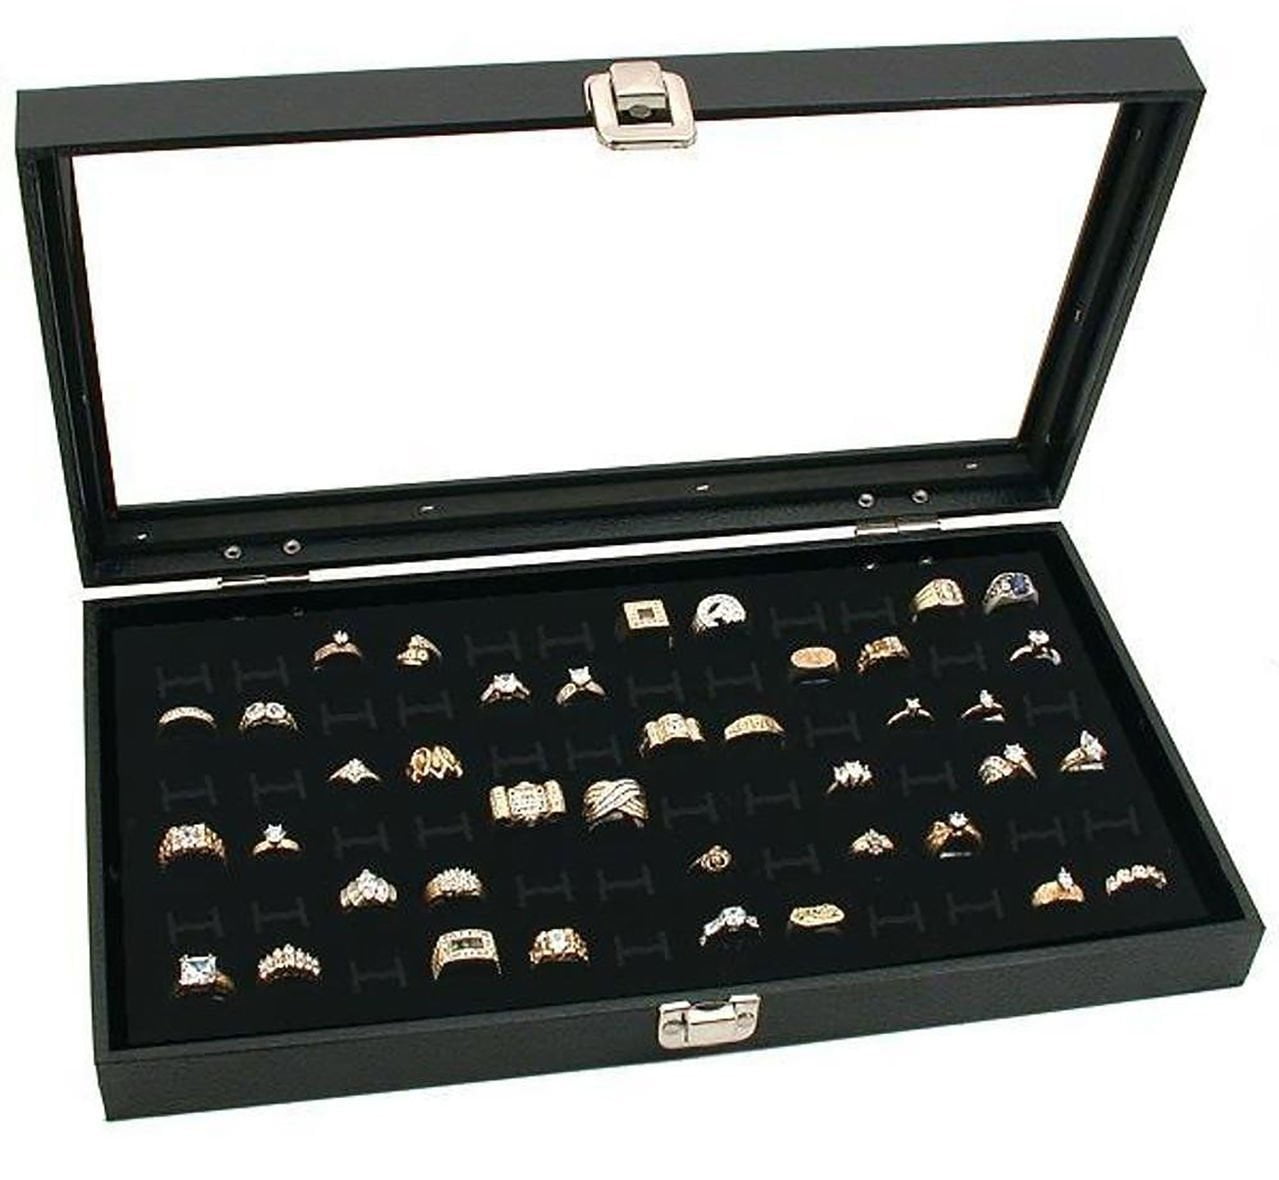 Glass Top Black Jewelry Display Case 72 Slot Compartment Ring Tray for sale online 